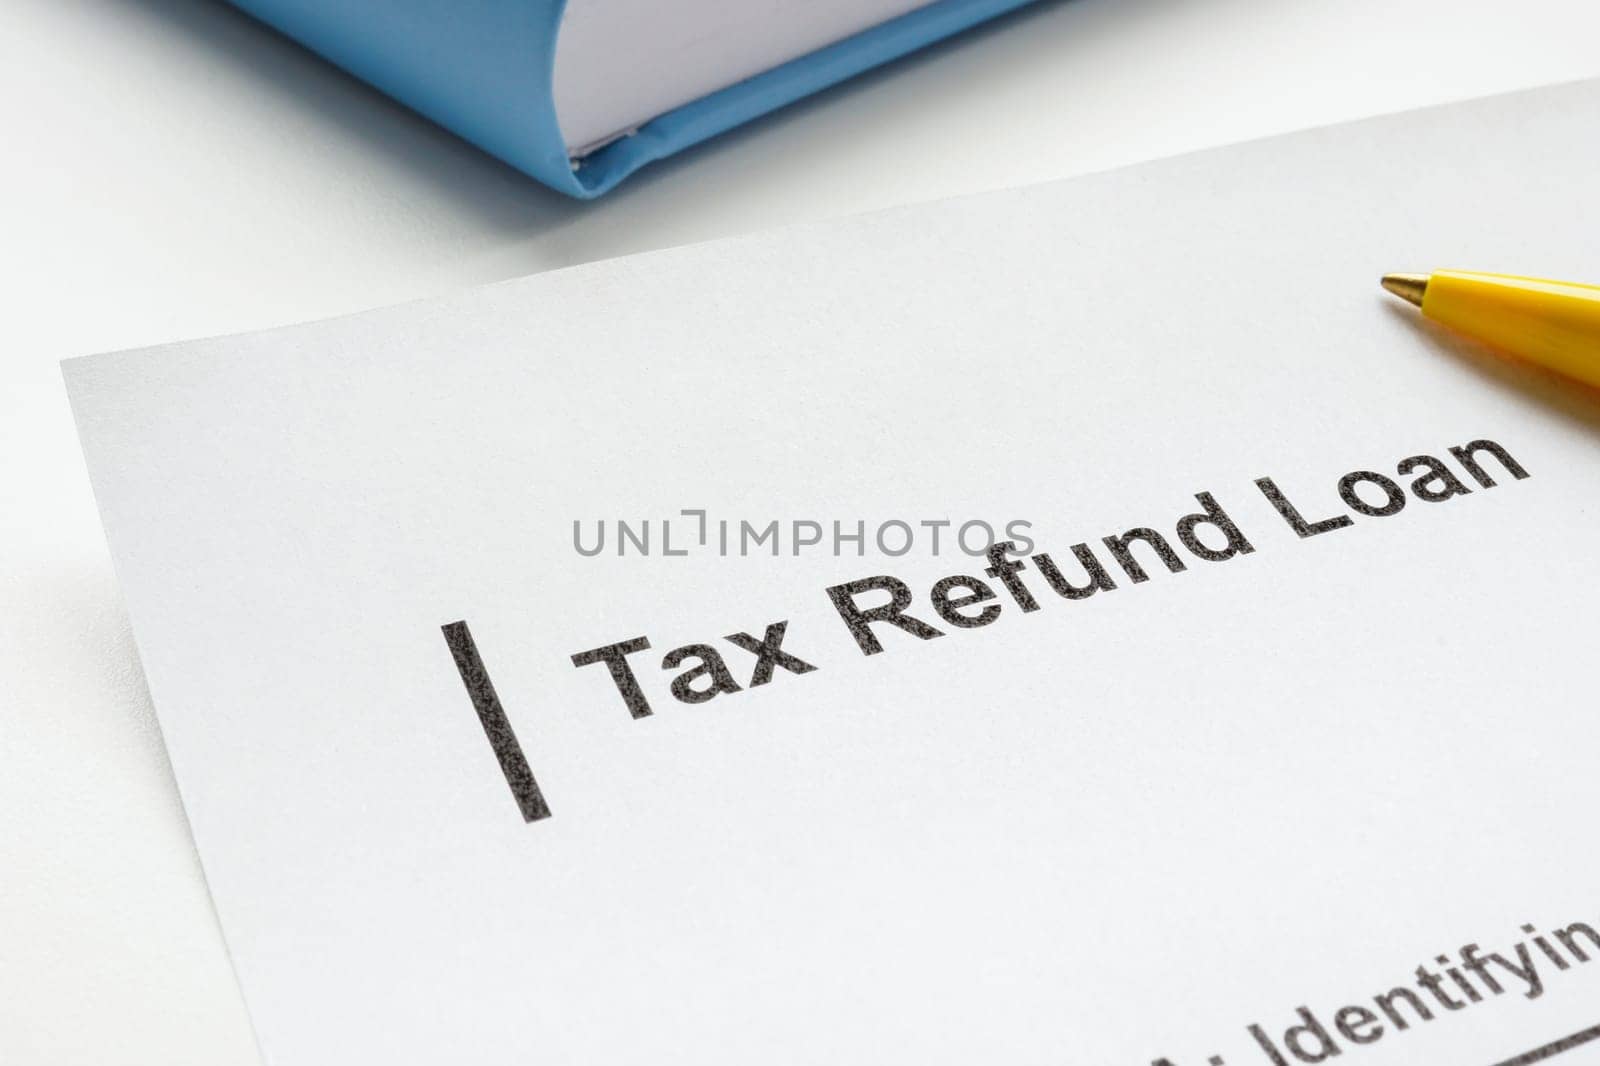 Tax refund loan application and book.